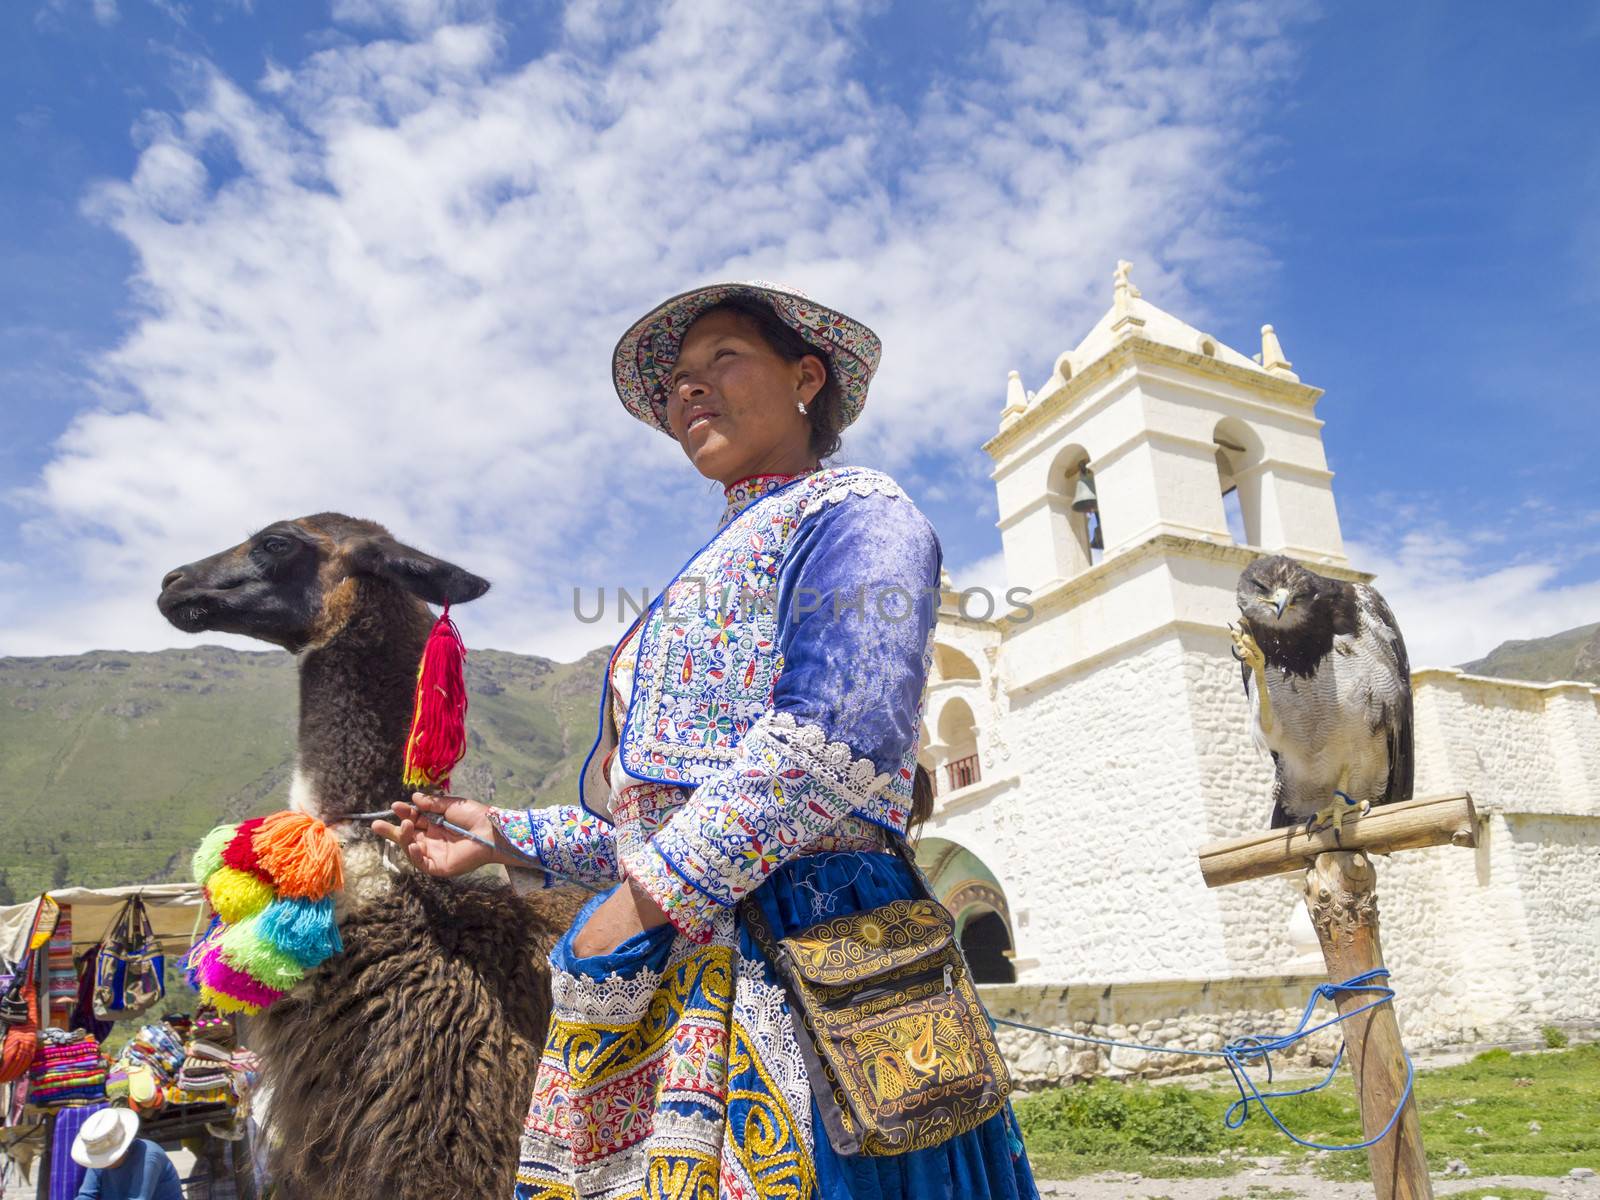 AREQUIPA, PERU - MAR 12: Unidentified Quechua indian woman with her Alpaca and Hawk in front of the Church on Mar 12, 2011 in Colca canyon, Arequipa, Peru. Colca canyon is home to the Andean Condor.